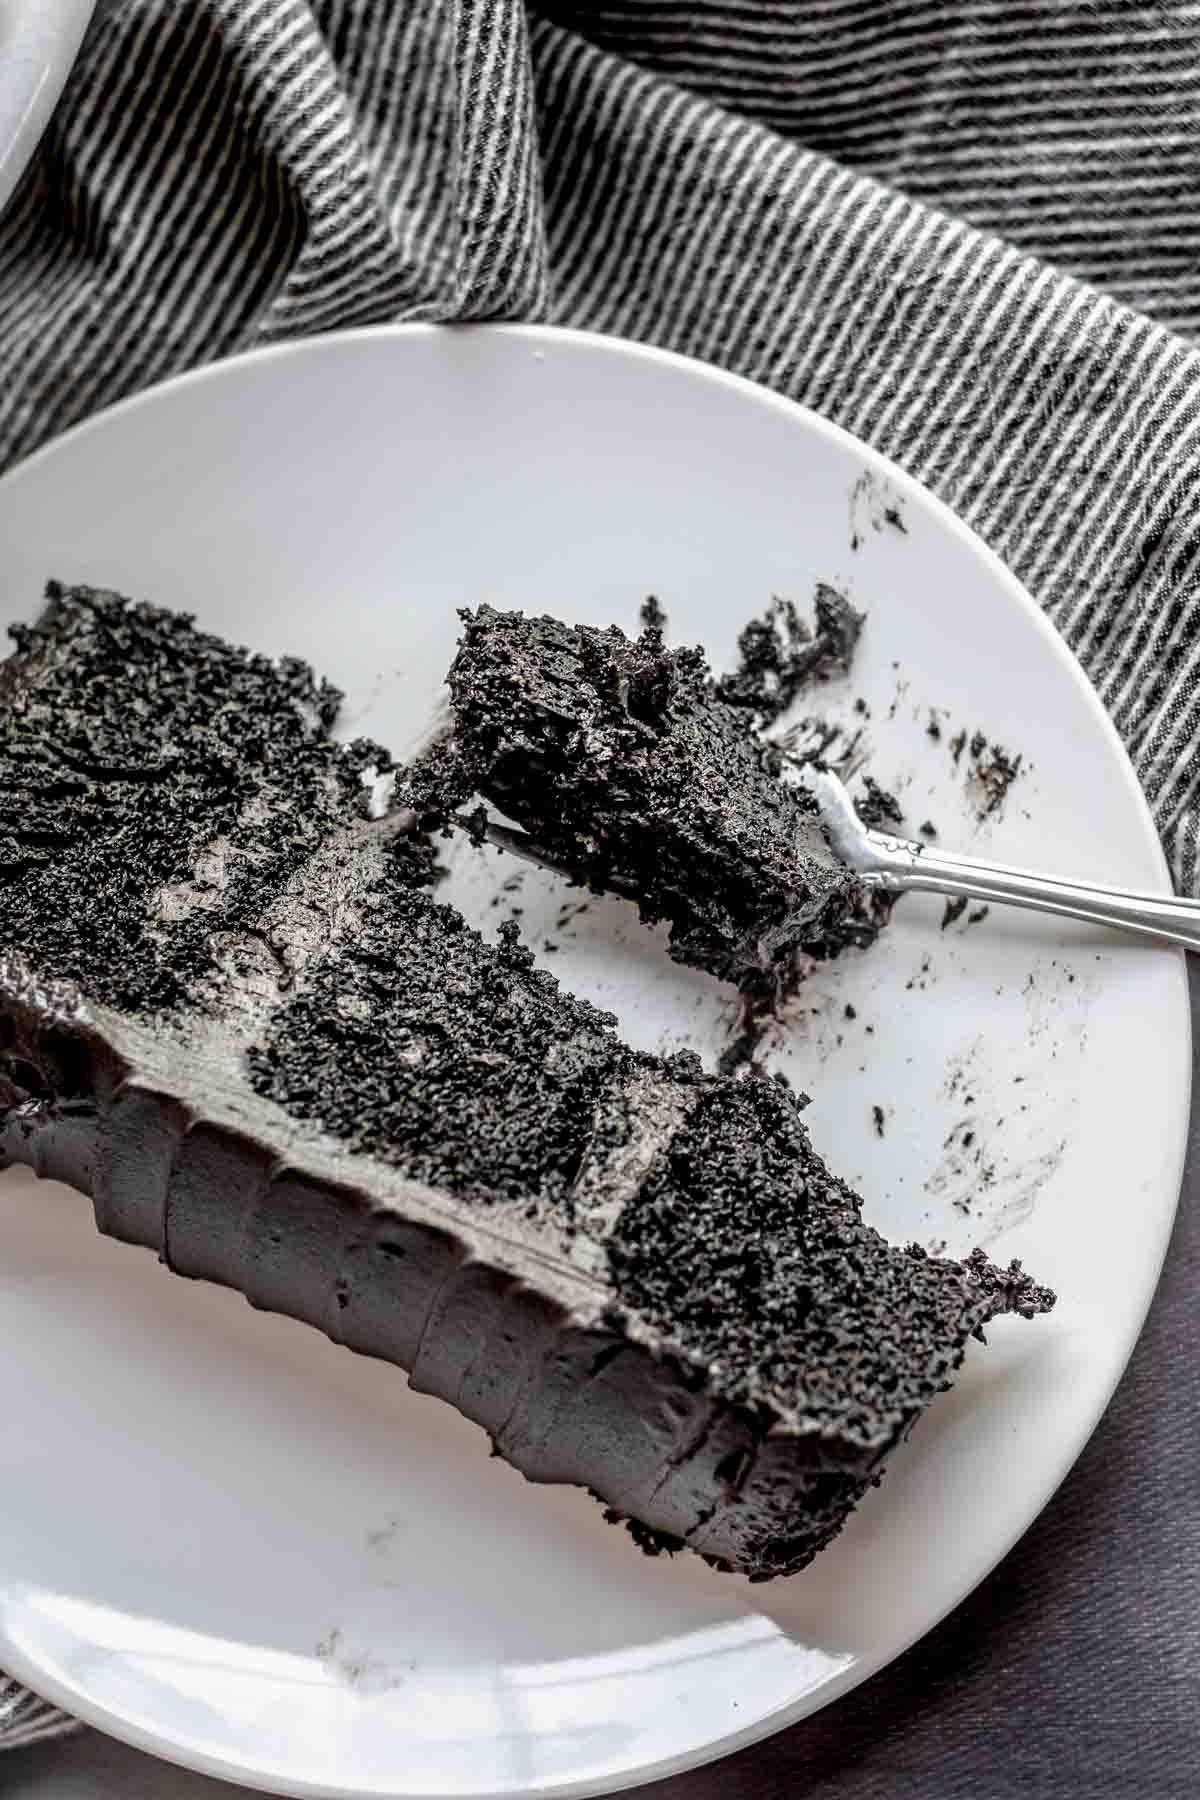 A slice of black cocoa cake on a plate. A fork has a piece of cake on it.